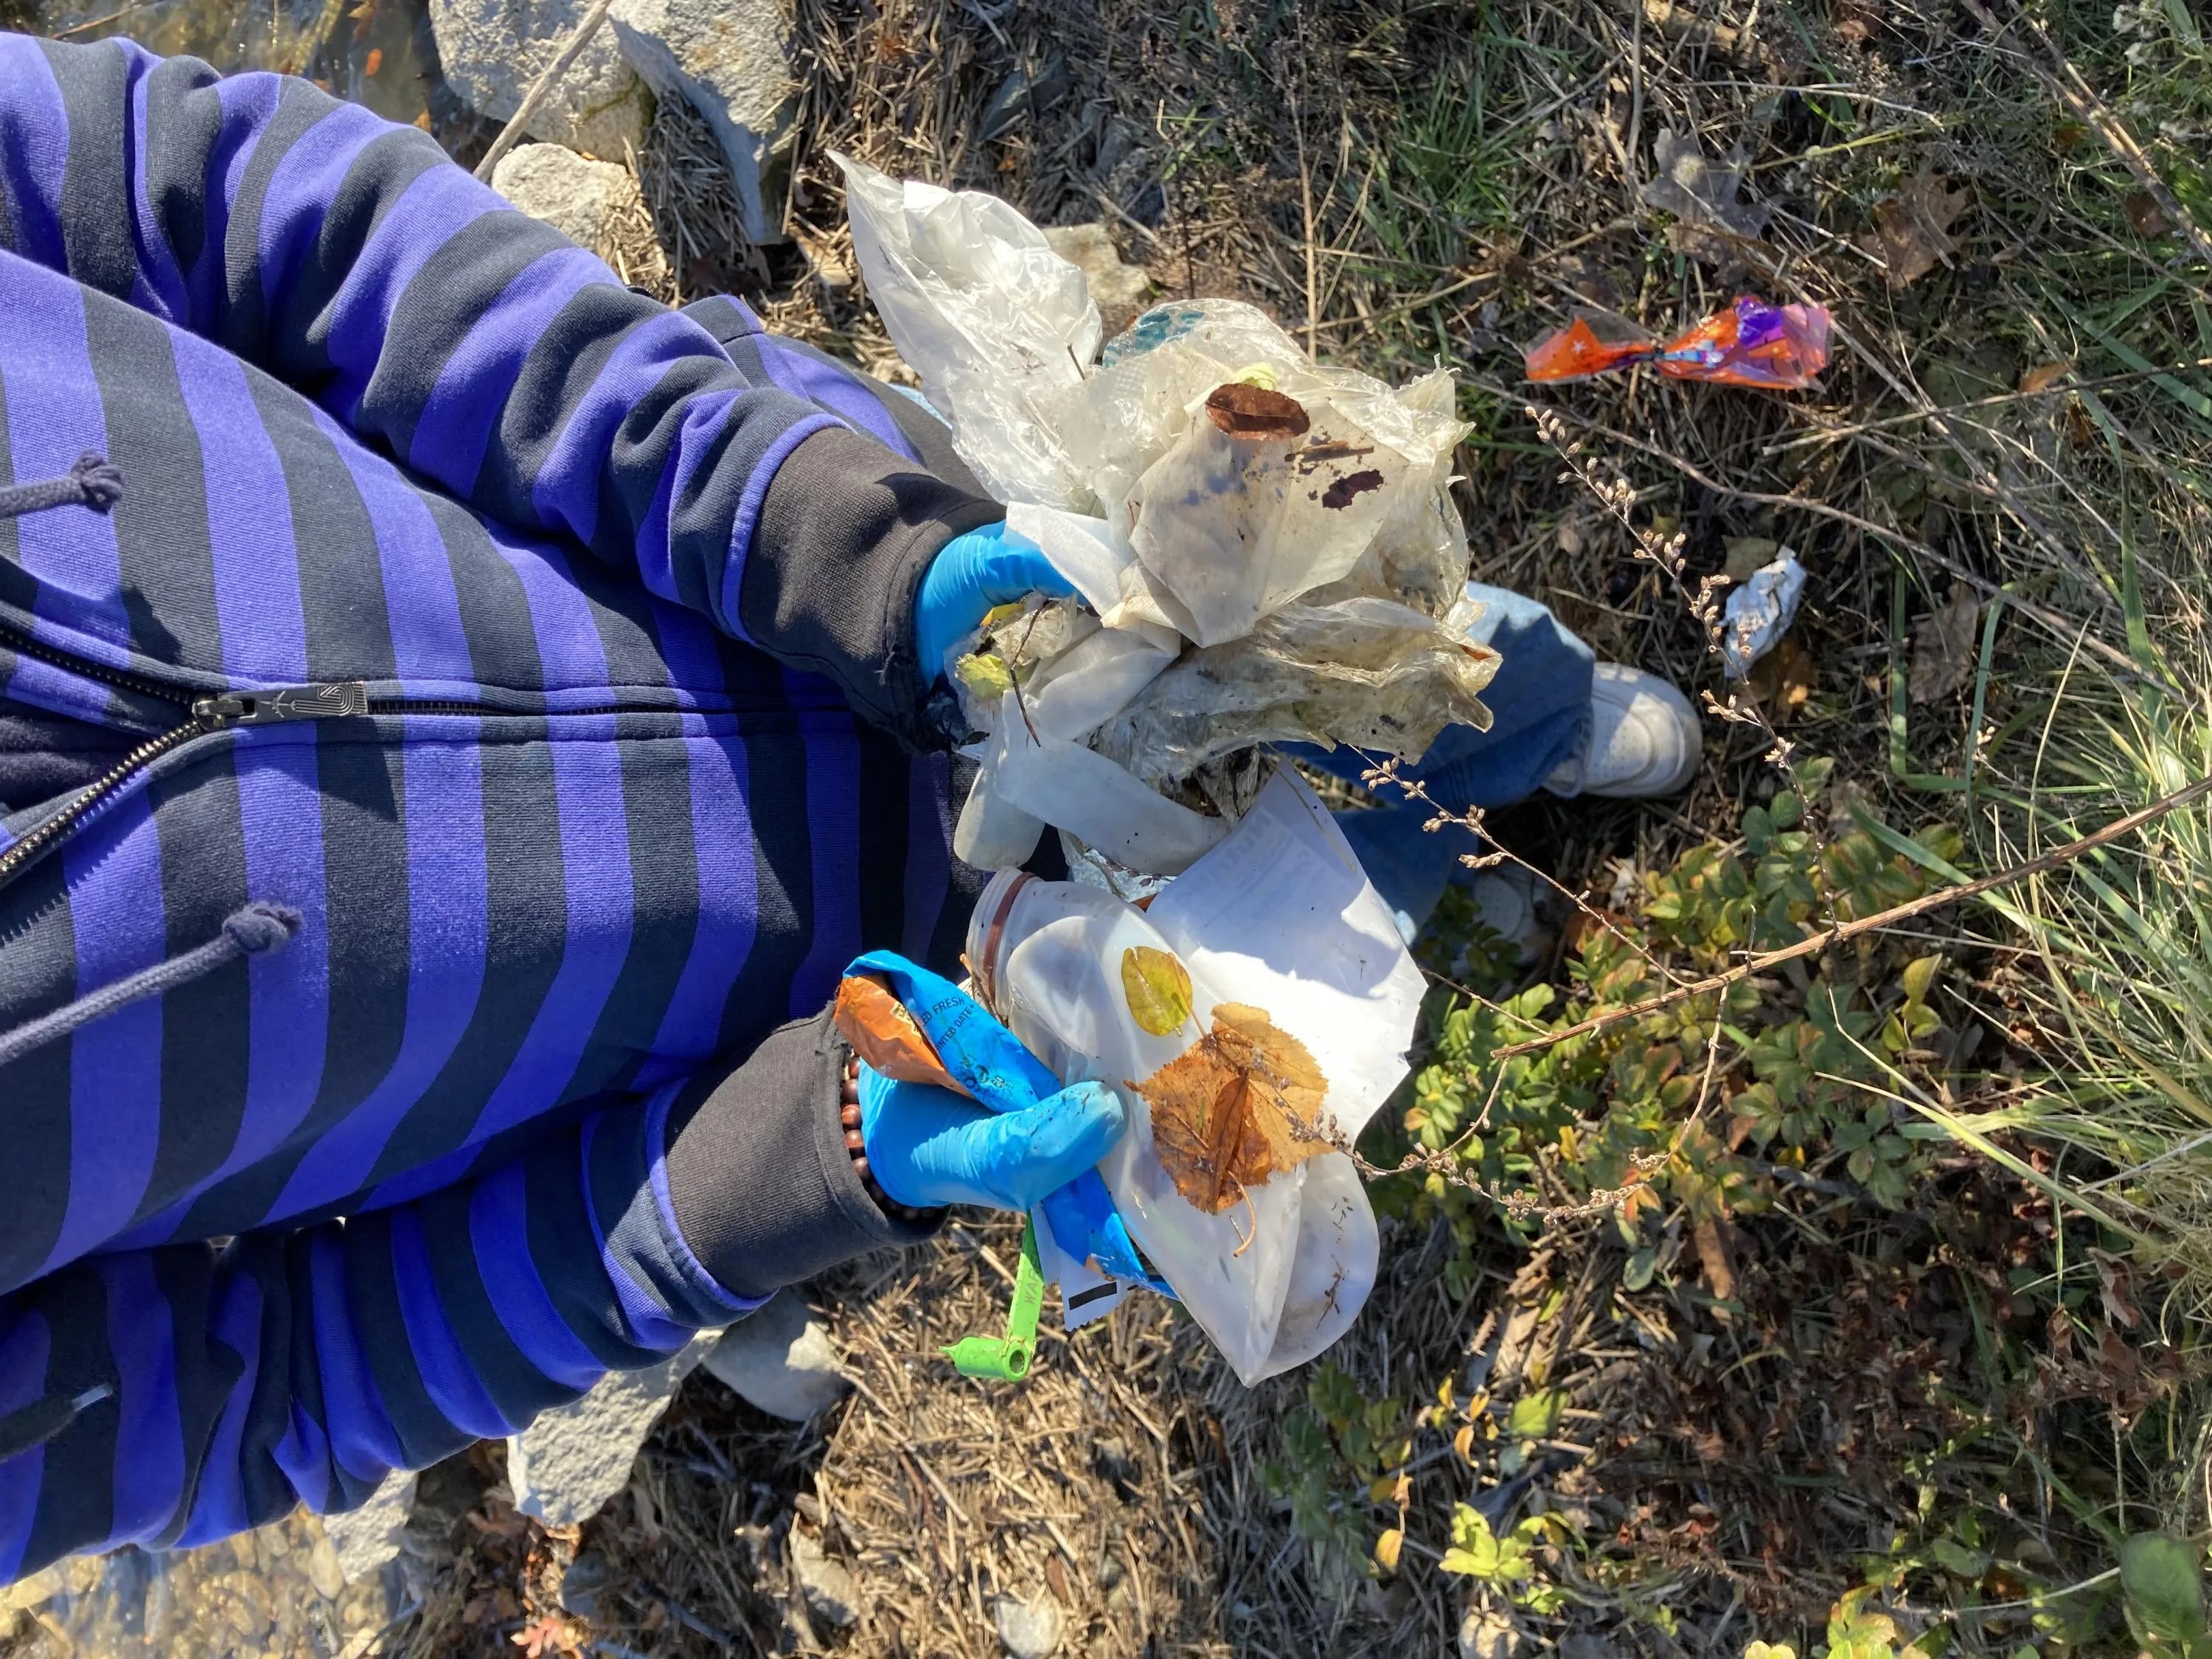 Photo of the forearms and hands of a student wearing blue safety gloves, holding a variety of ocean debris such as plastic food wrappers and a plastic water bottle, while standing outside in the grass near the water.